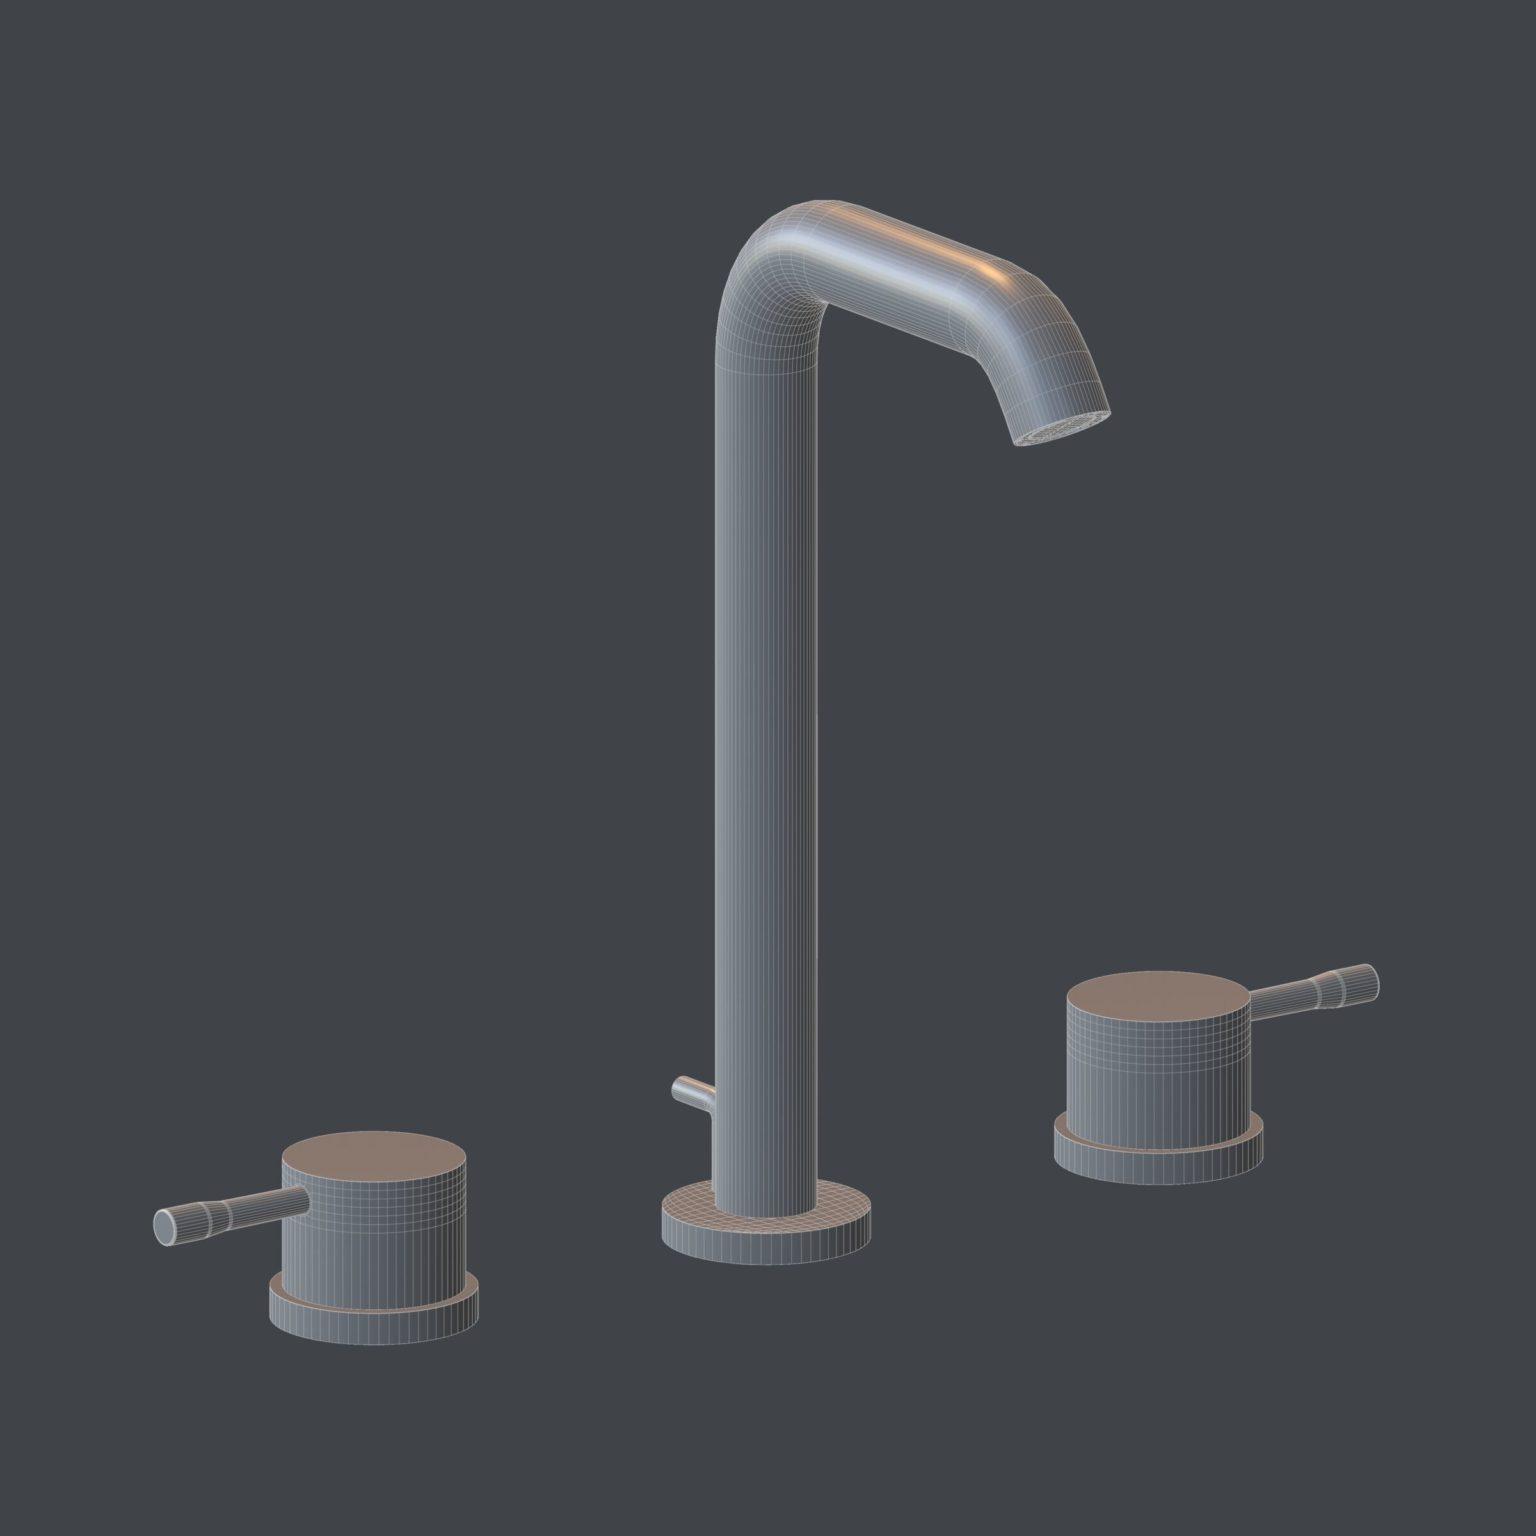 Faucet - Wireframe